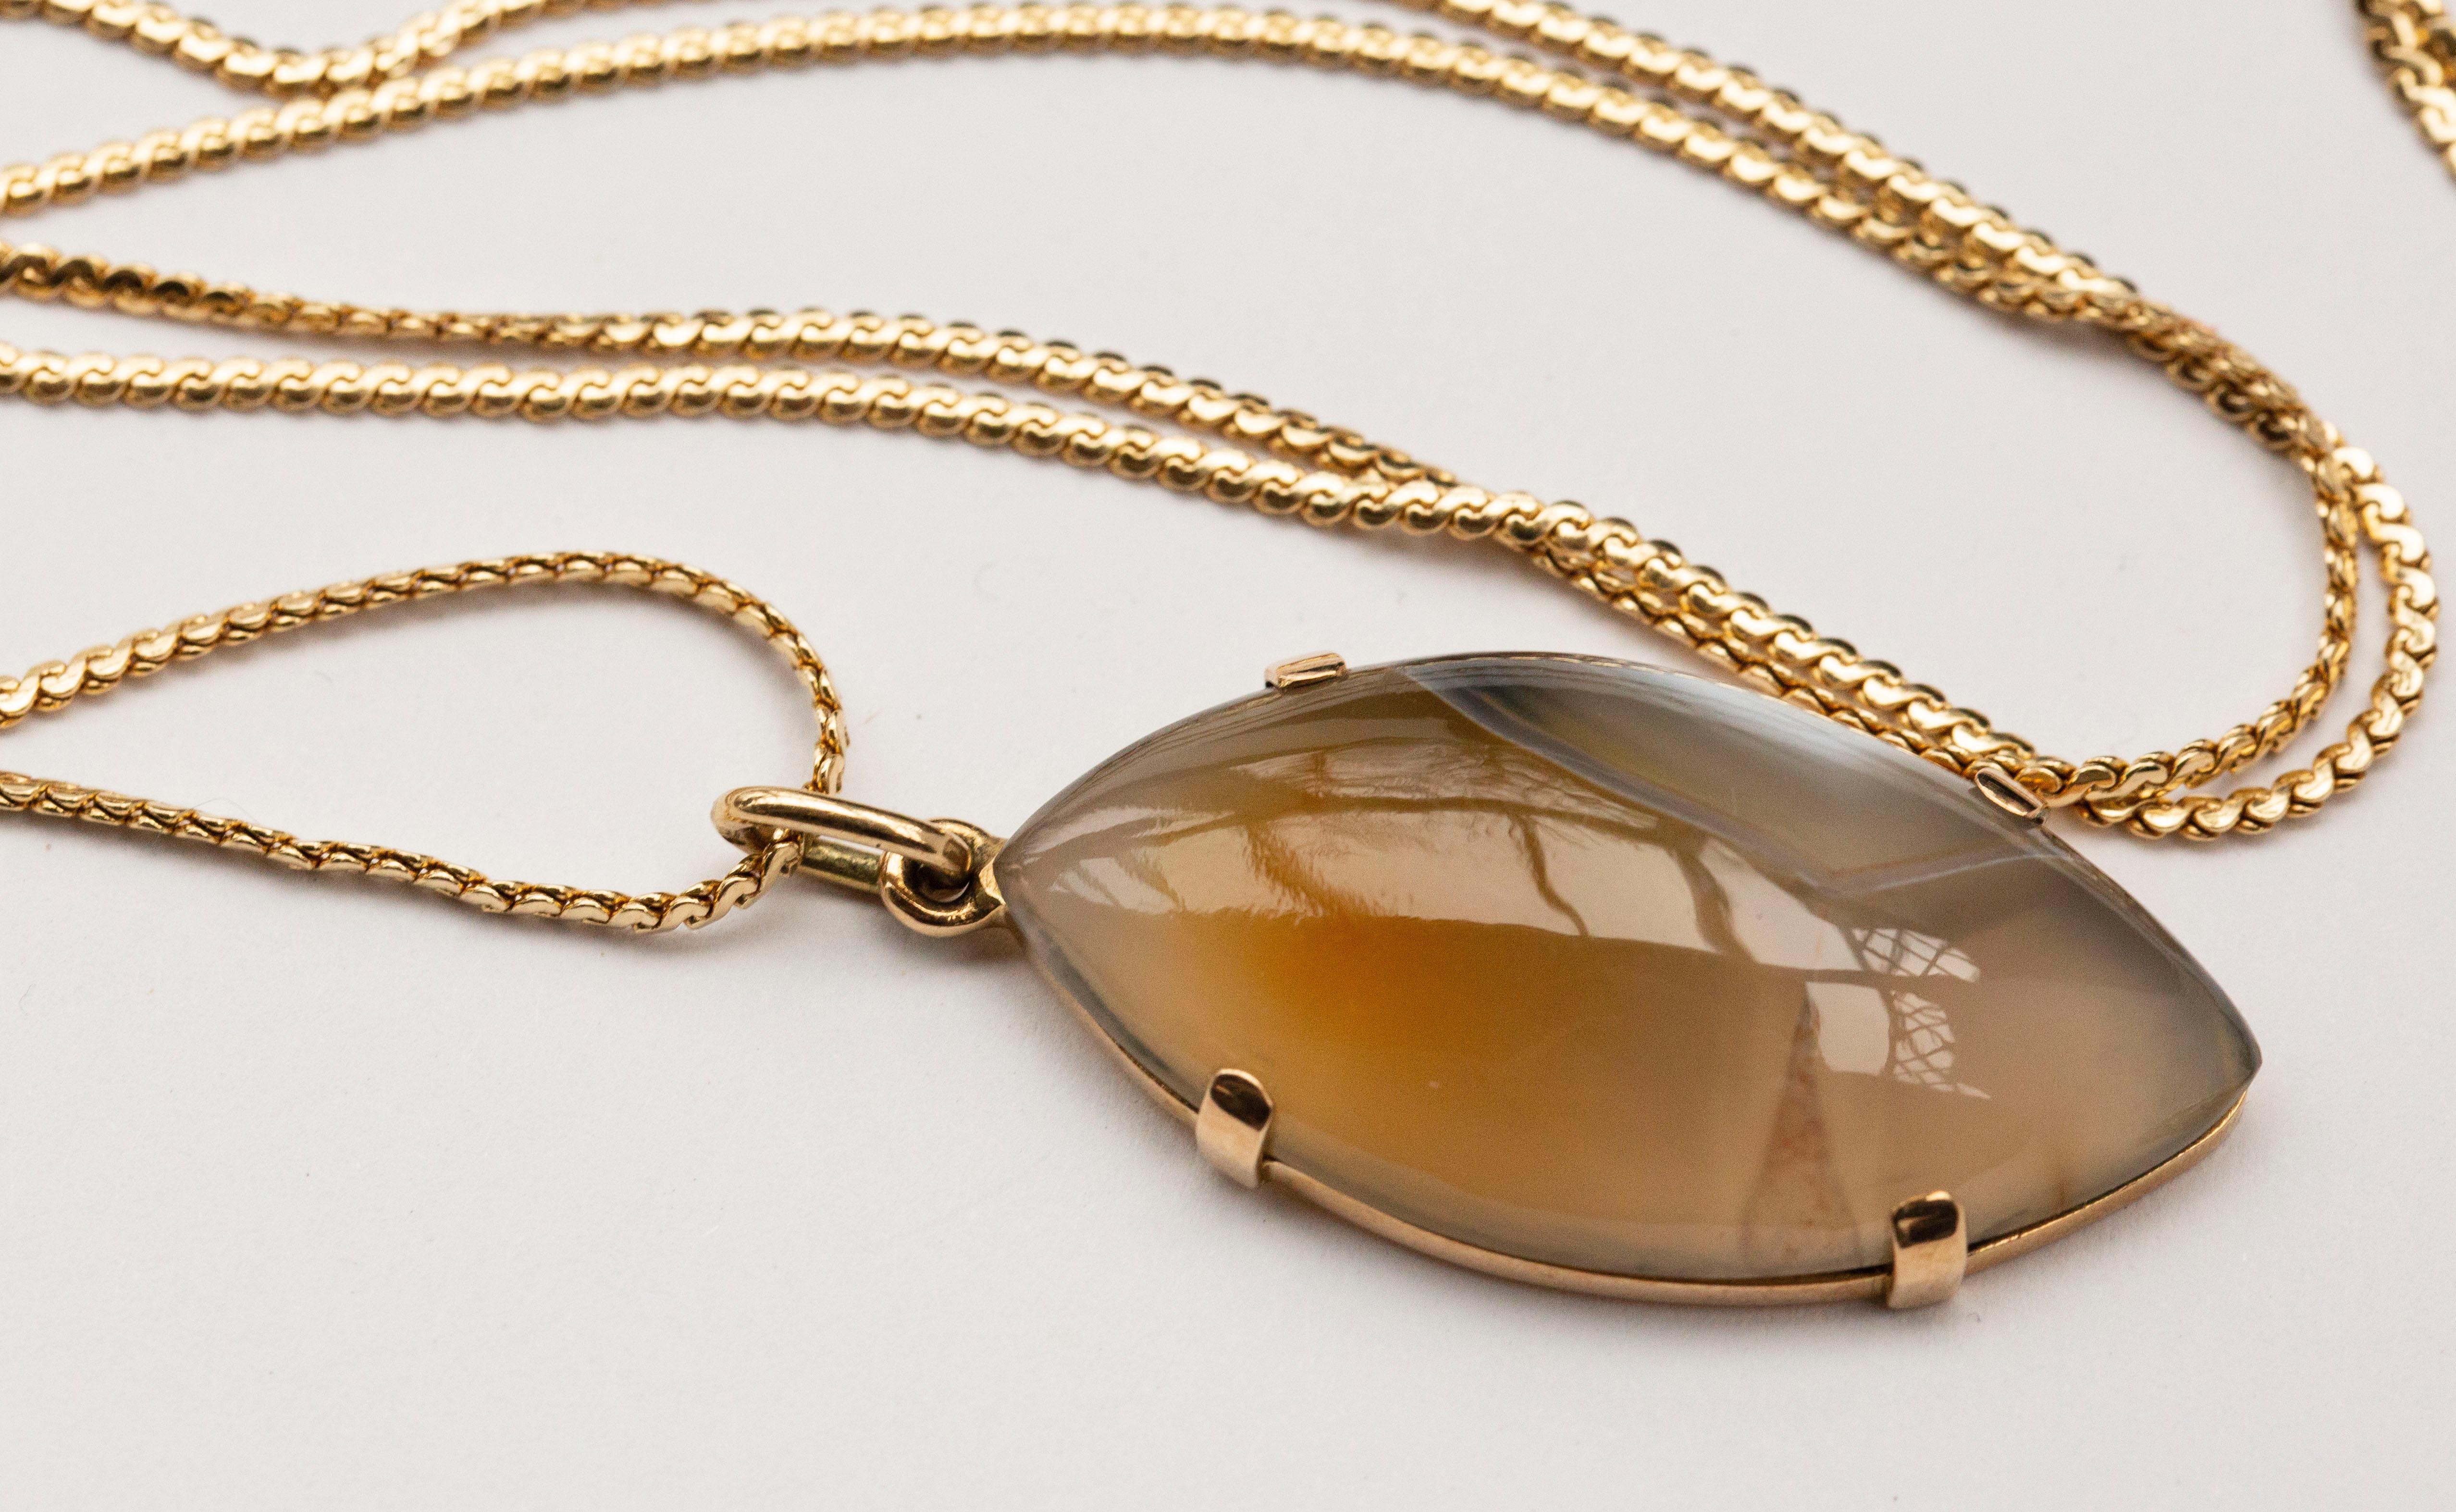 Cabochon 14 Karat Gold Necklace Chain with an Agate Pendant in 14 Karat Gold Setting For Sale